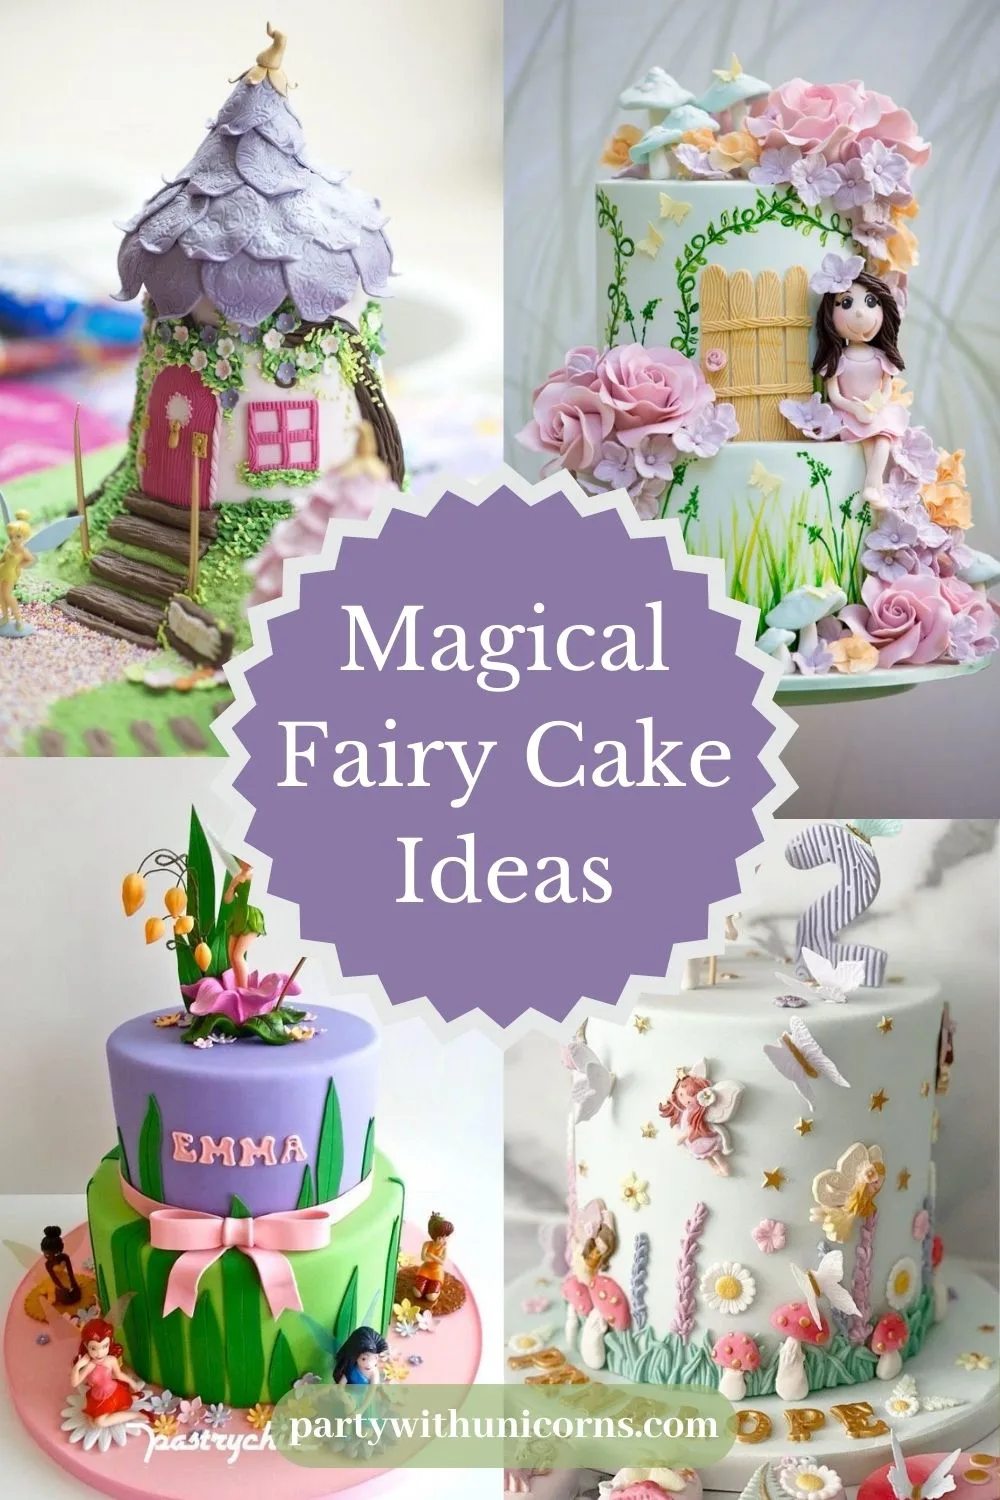 5 things to consider when choosing your unique cake design | Cakes by Robin-nextbuild.com.vn